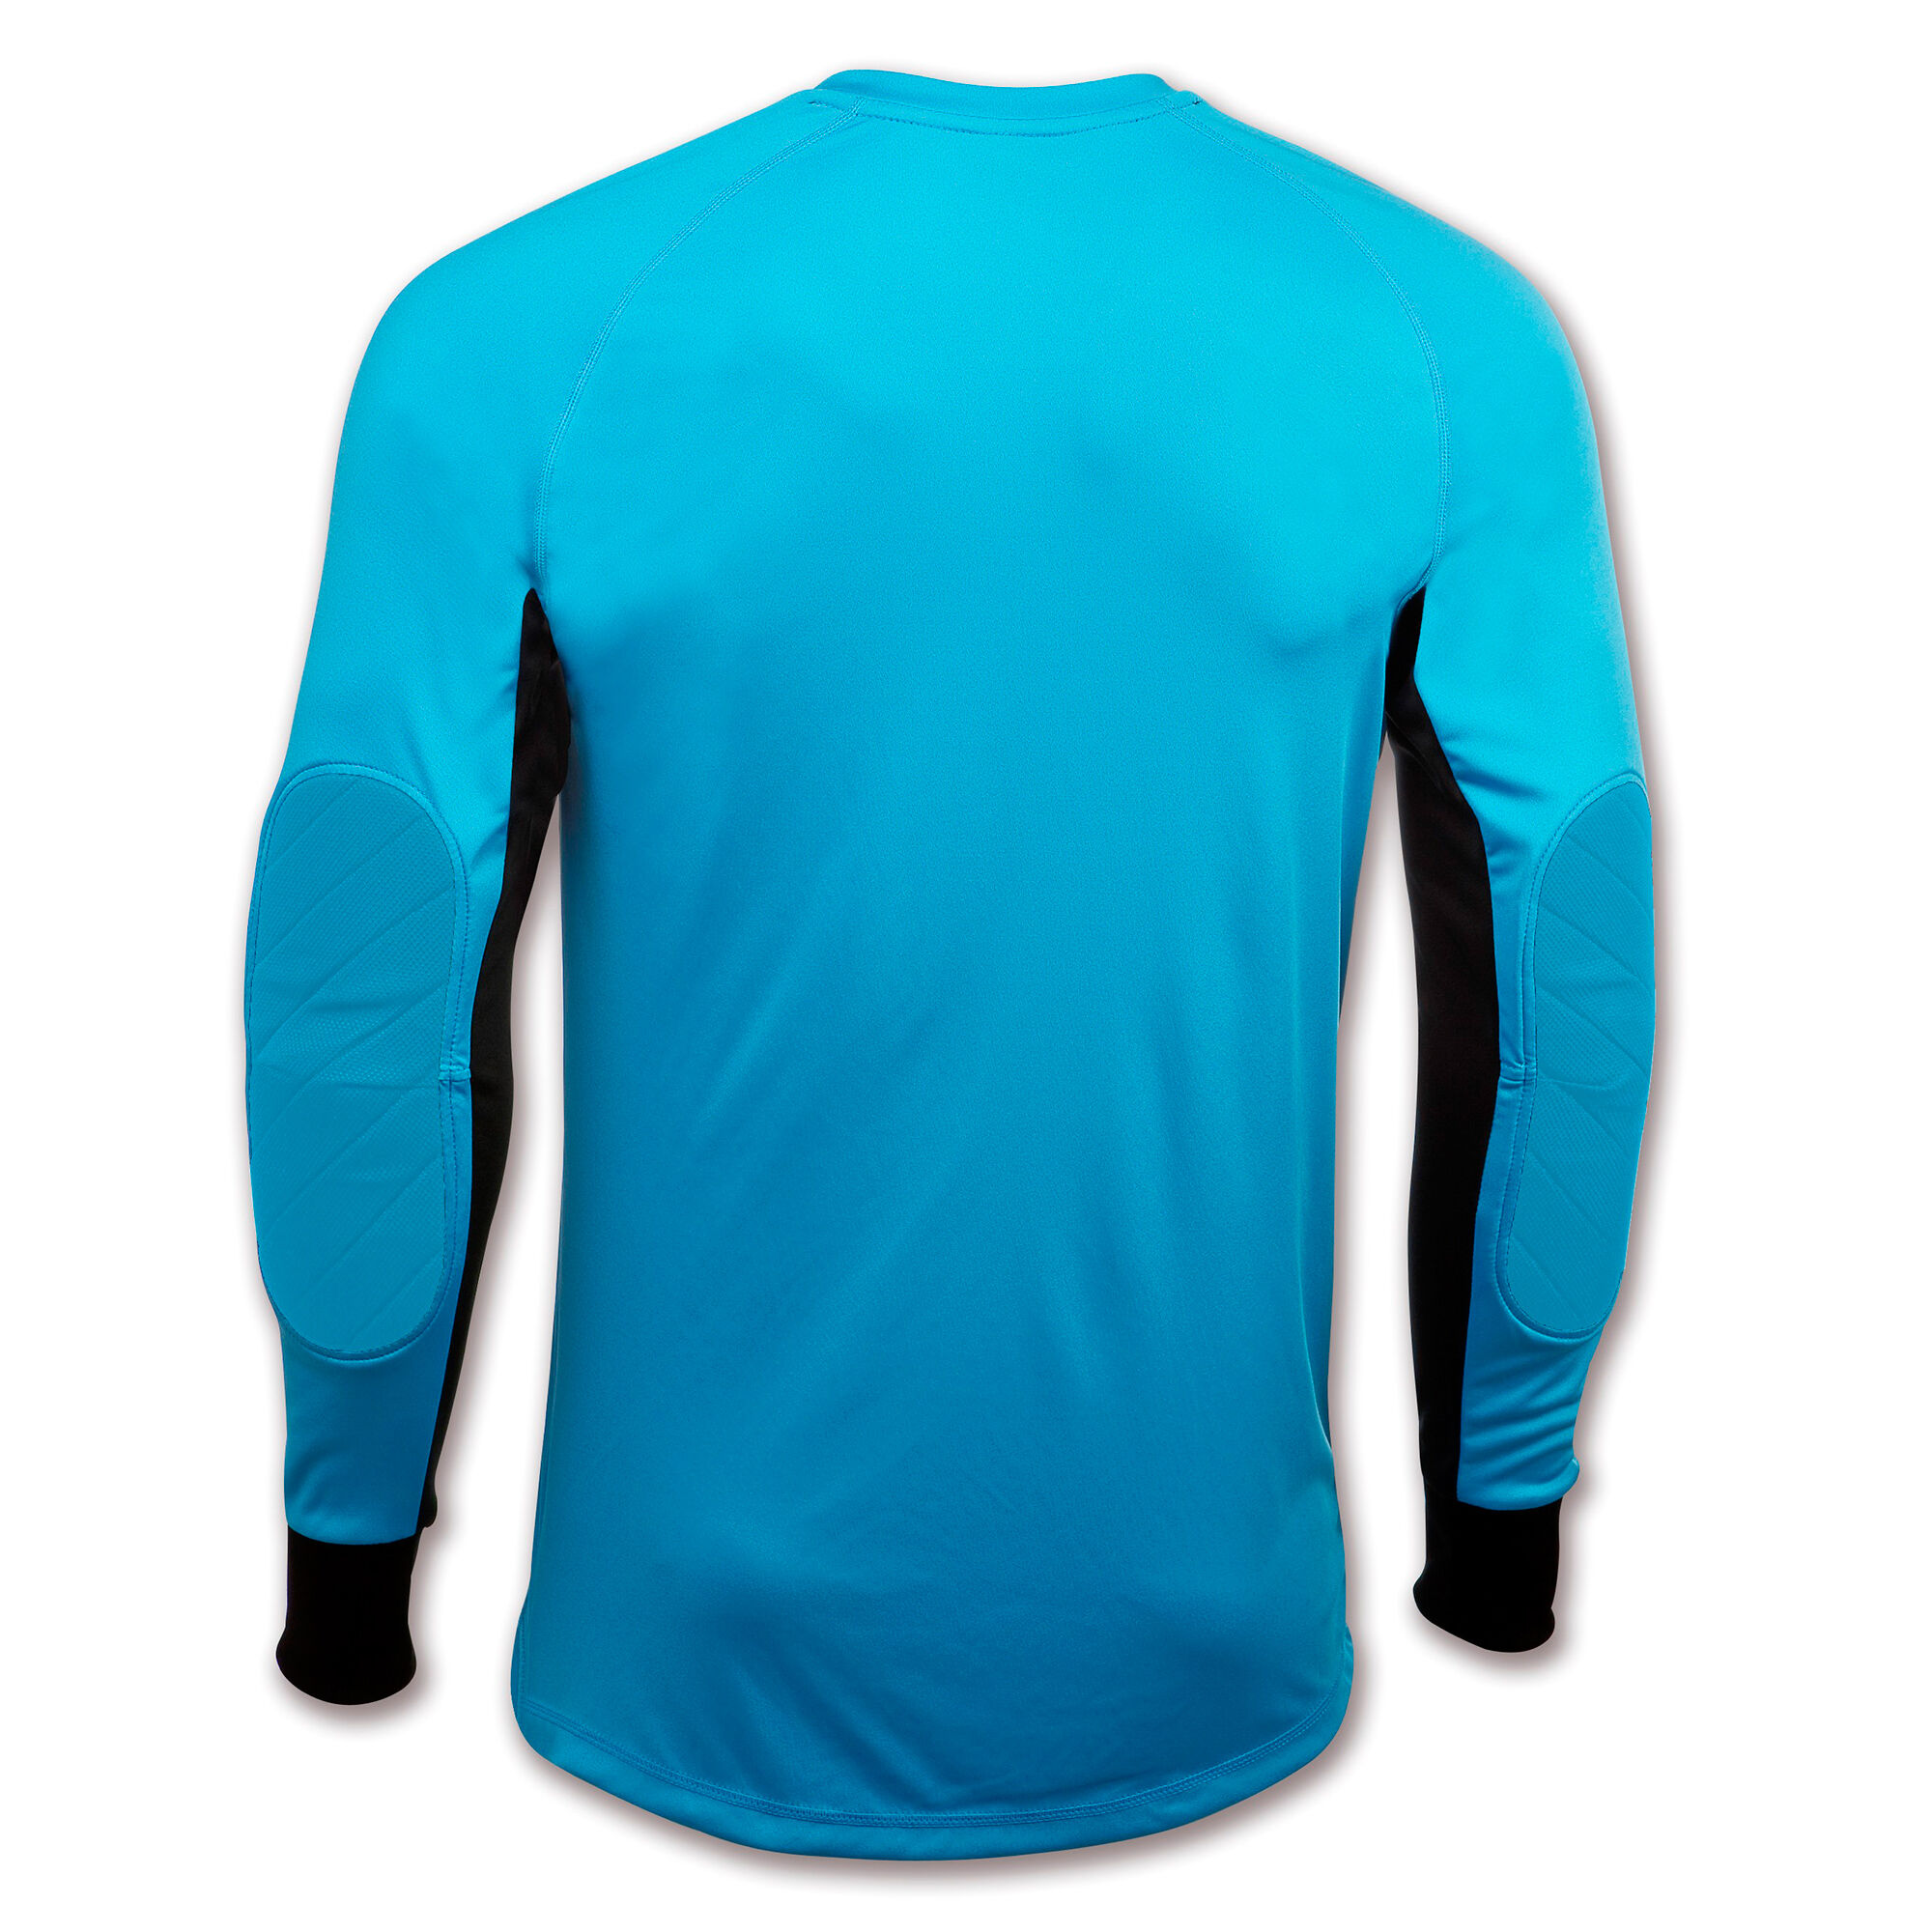 Maillot manches longues homme Protec turquoise